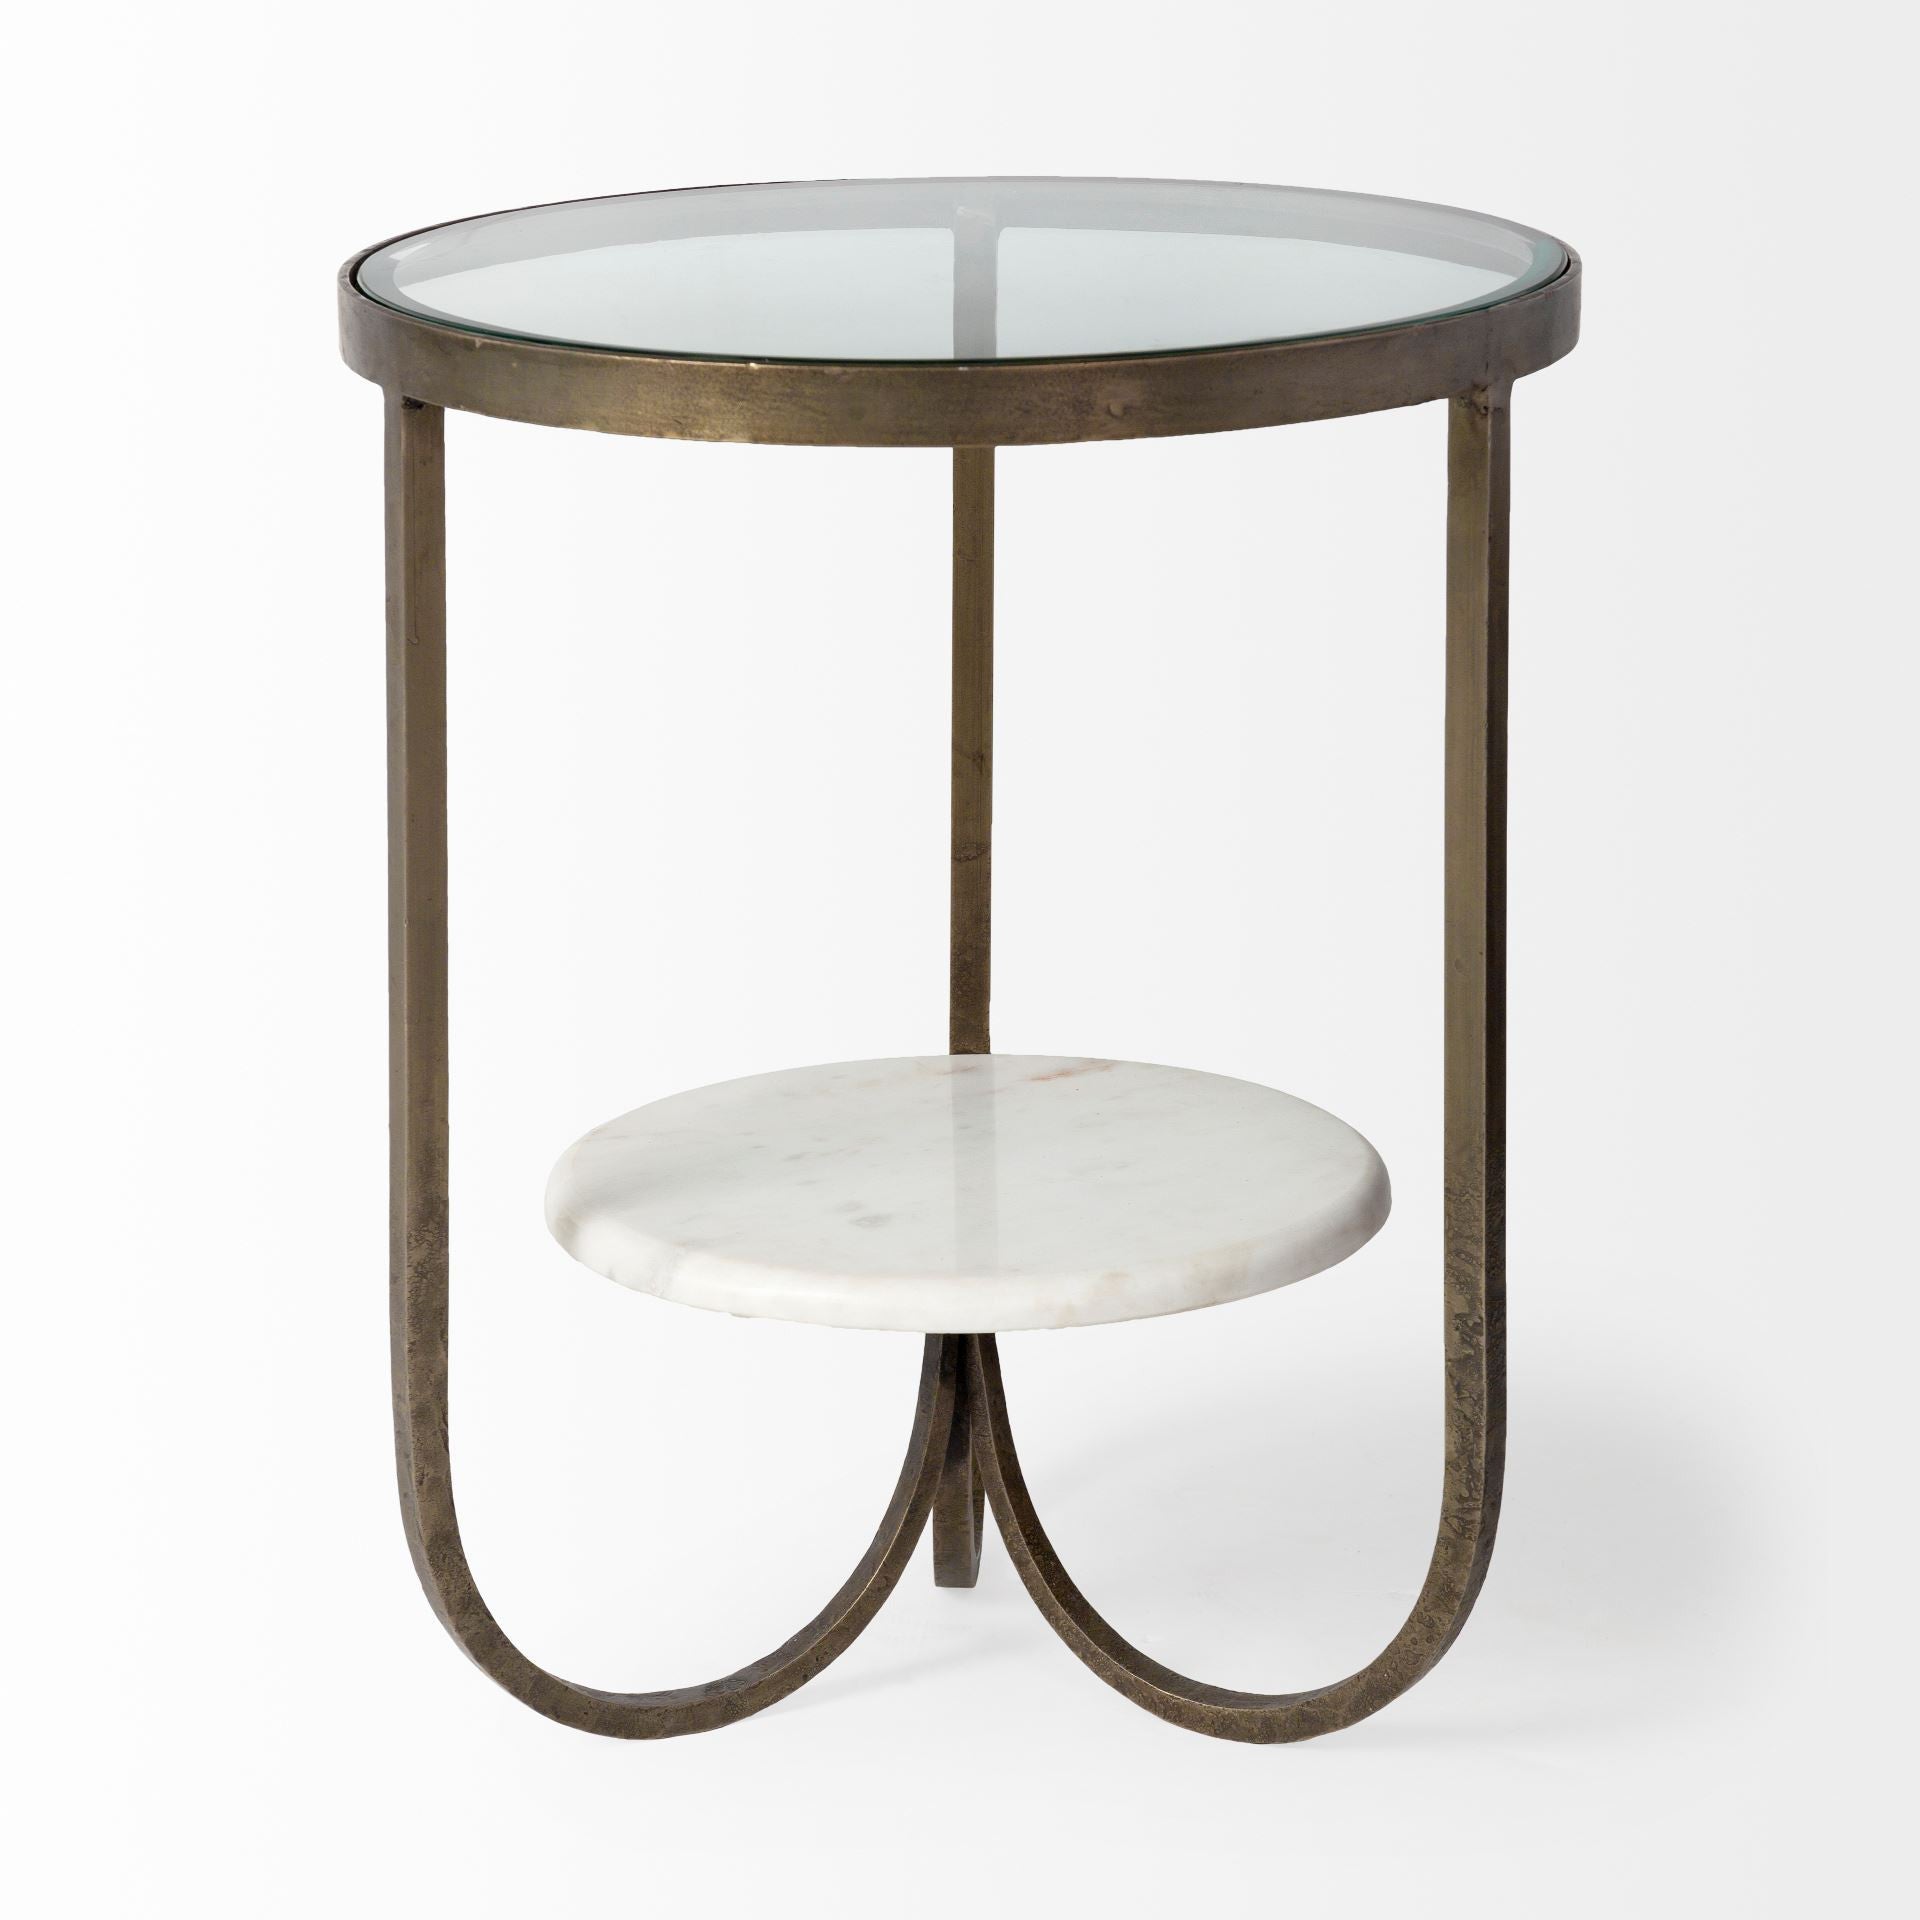 Round Glass Top Metal Side Table With Marble Shelf On Bottom